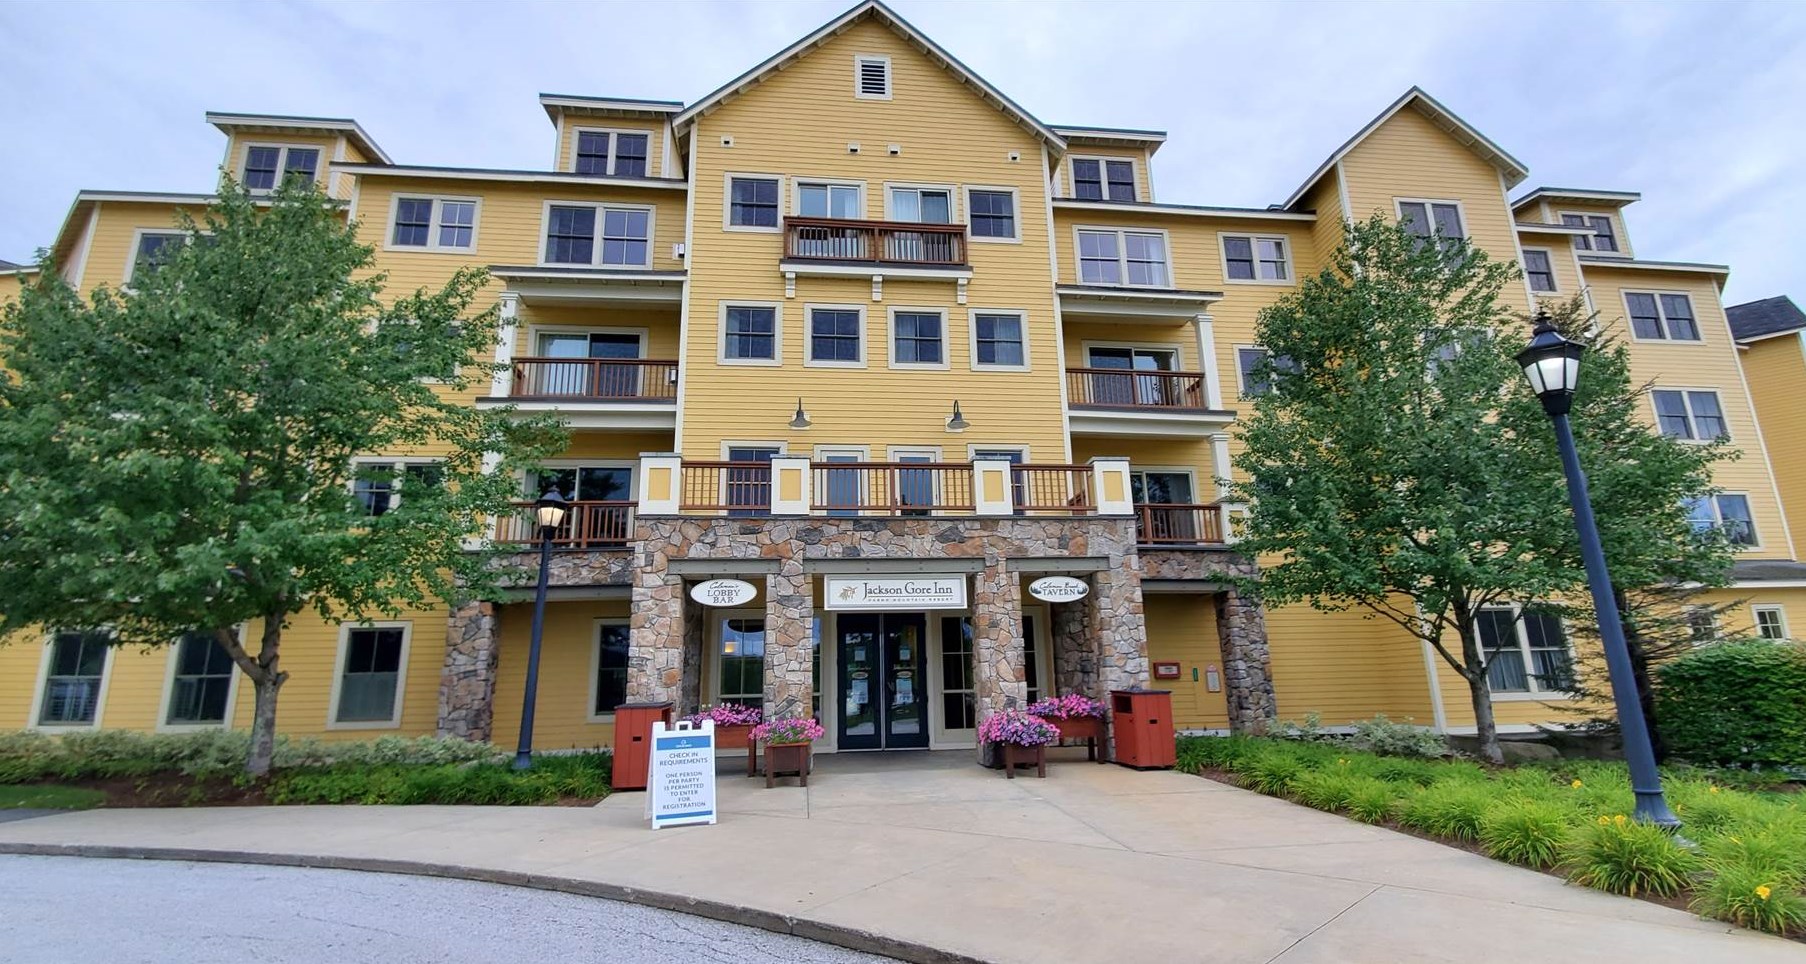 This unit has a balcony to sit and enjoy the fresh Vermont air and is just steps down the hall from the elevator. This has been a great rental as it is ADA accessible and sleeps 6. The en suite bedroom has a King bed and master bath with jetted tub. The second bathroom has a shower with a fold-down seat. The living area has a queen murphy bed and pull-out sofa for more guests. There is also a full kitchen. In 2019, owners stayed 39 nights and rented 12 nights which almost covered the fees. Owners also have an RCI membership and are happy to transfer that over. They bank some of the weeks each year for trade and have enjoyed staying in other resorts for a fraction of the cost. Jackson Gore ownership also comes with use of the ski locker year round, memberships at Spring House, and use of the outdoor pool and hot tubs too. There is an owners' lounge and library only accessible to owners. The main common area offers a large fireplace and tavern. There is also a restaurant offering room service. Enjoy the outdoor firepit and outdoor concerts,  Owner is a licensed real estate broker. Type of deed is Interval Warranty Deed.